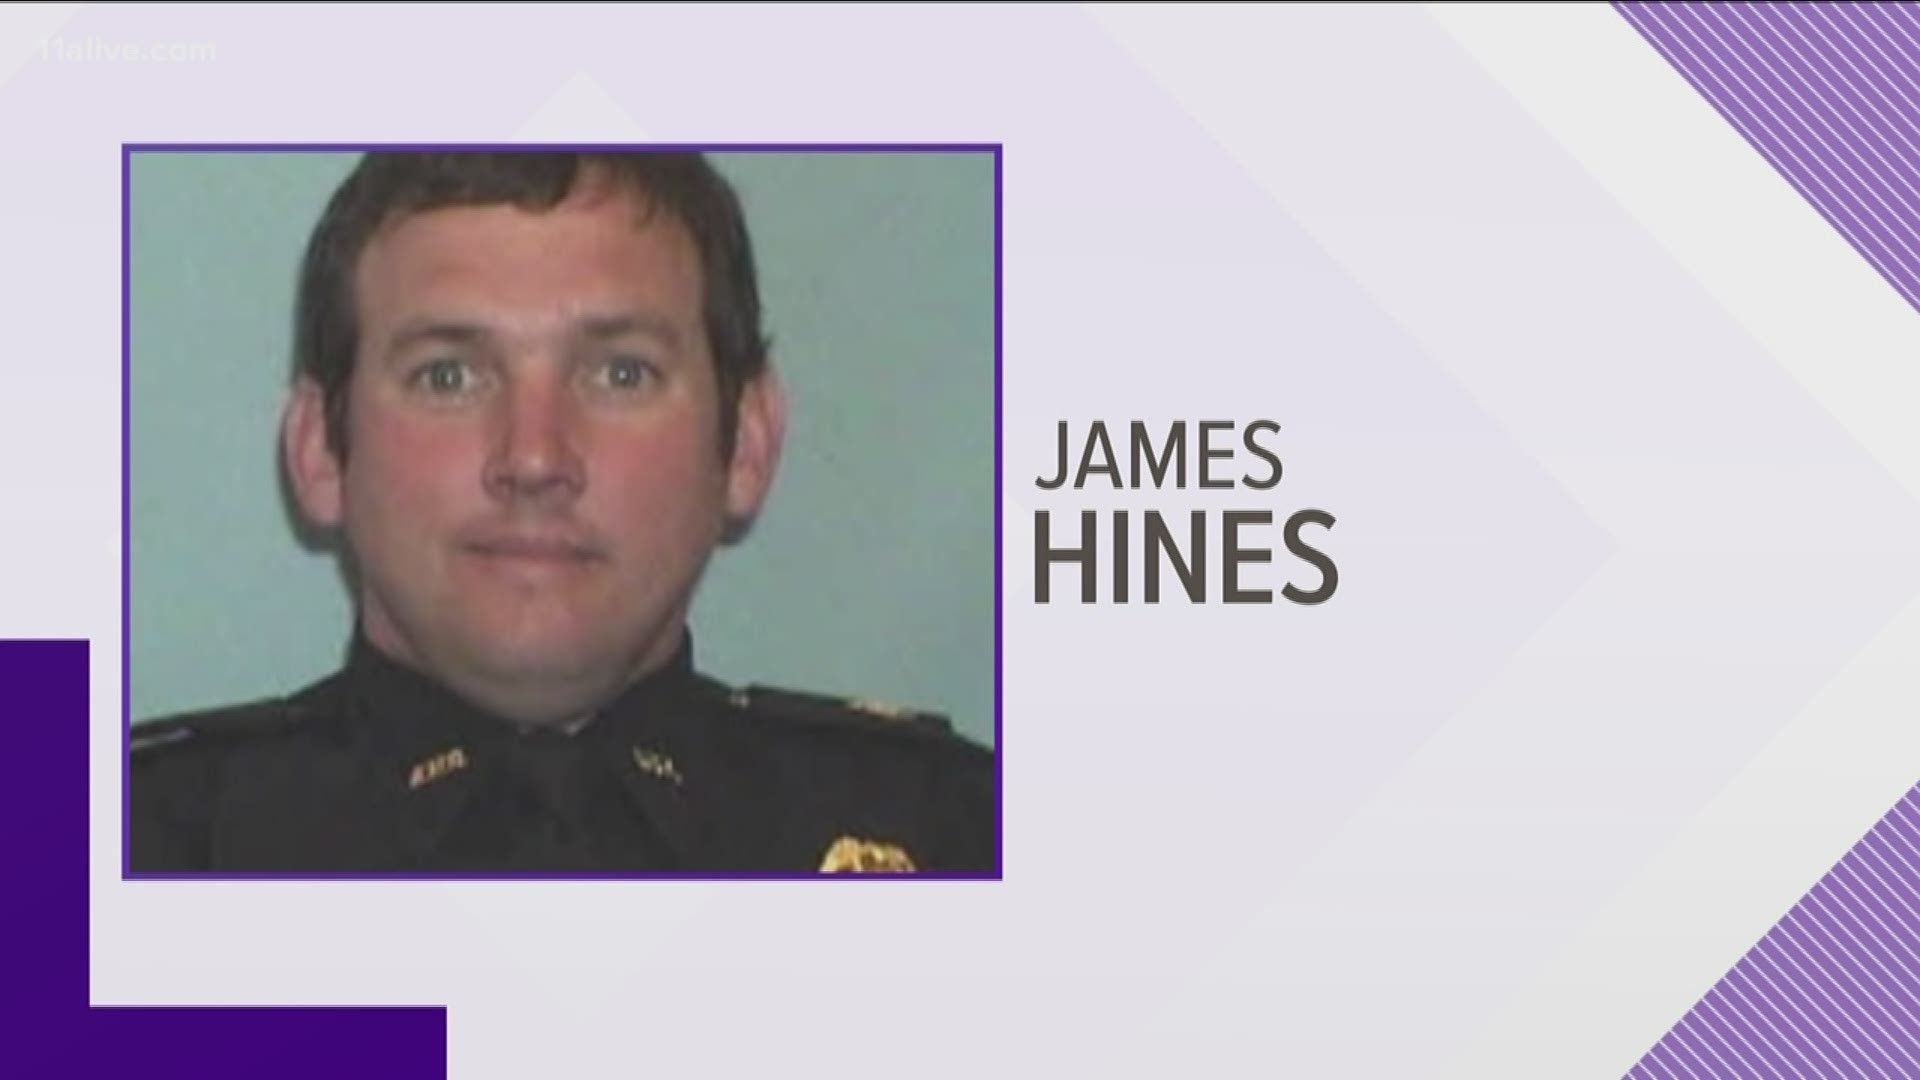 Sgt. James Hines was dismissed from duty by Atlanta Police Chief Erika Shields on May 17.